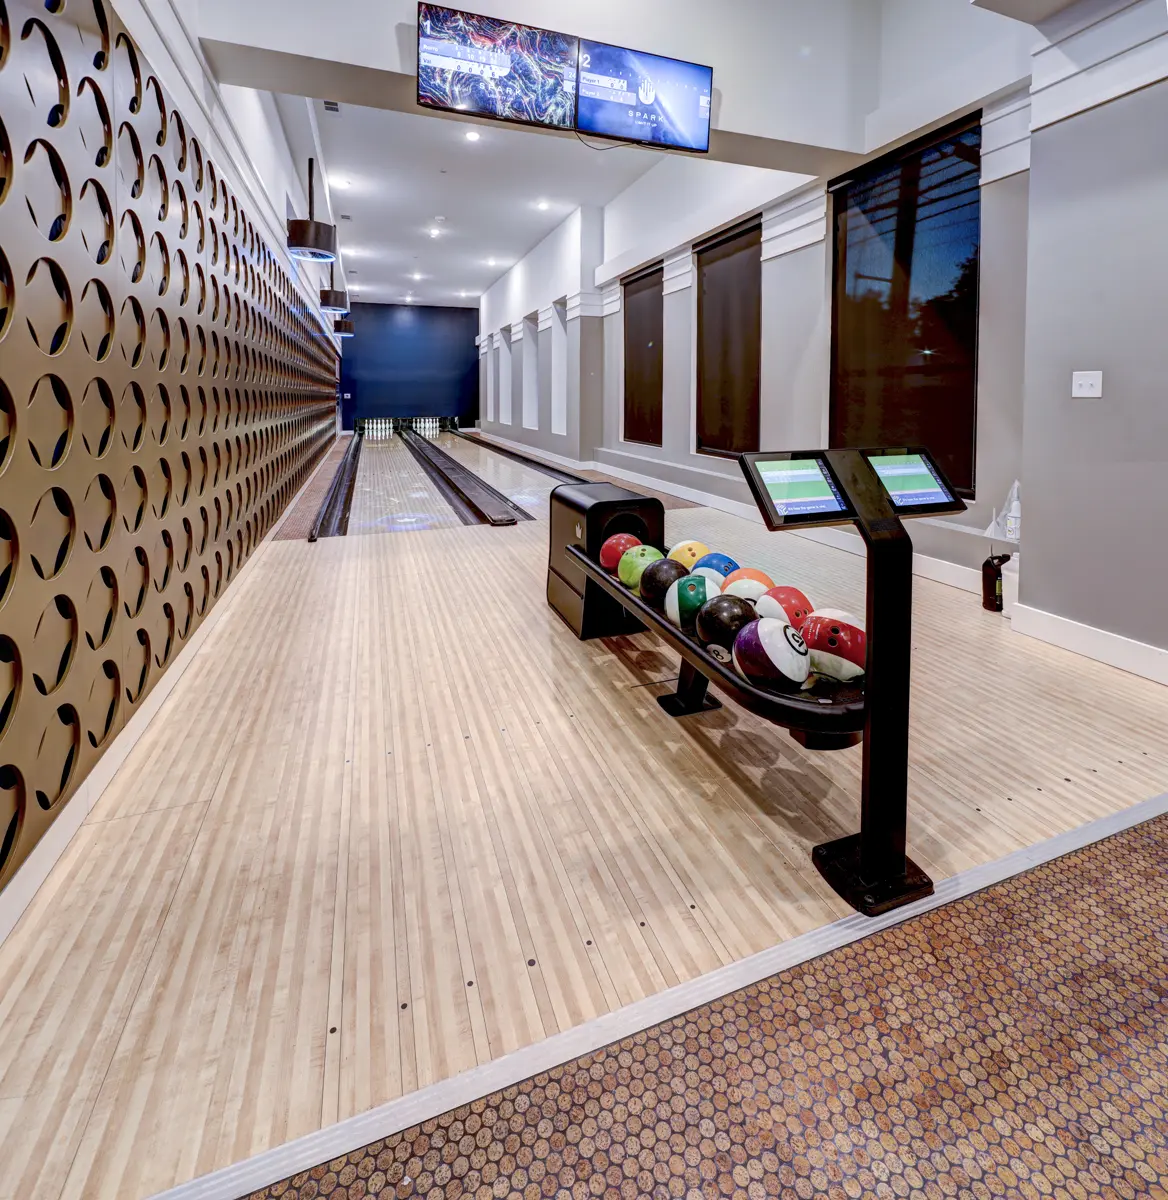 Image of The Mark's indoor bowling alley amenity.